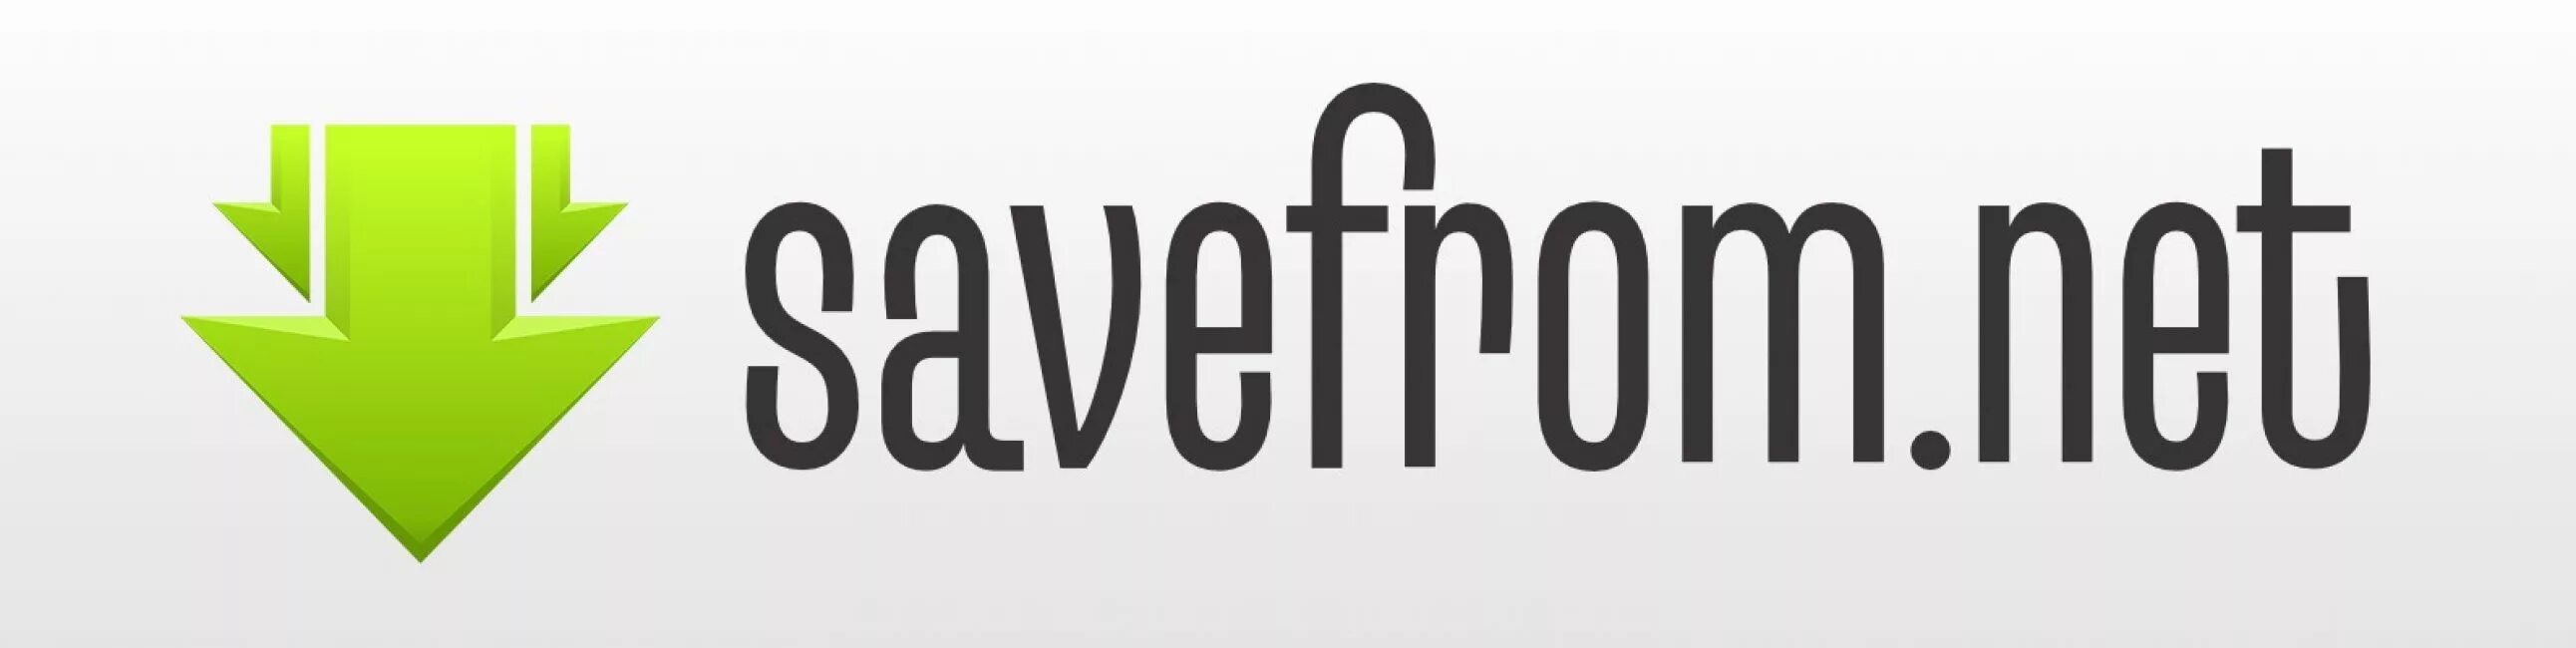 En extensions details savefromnet helper. Savefrom. Savefrom.net иконка. Savefrom логотип. Safe from.